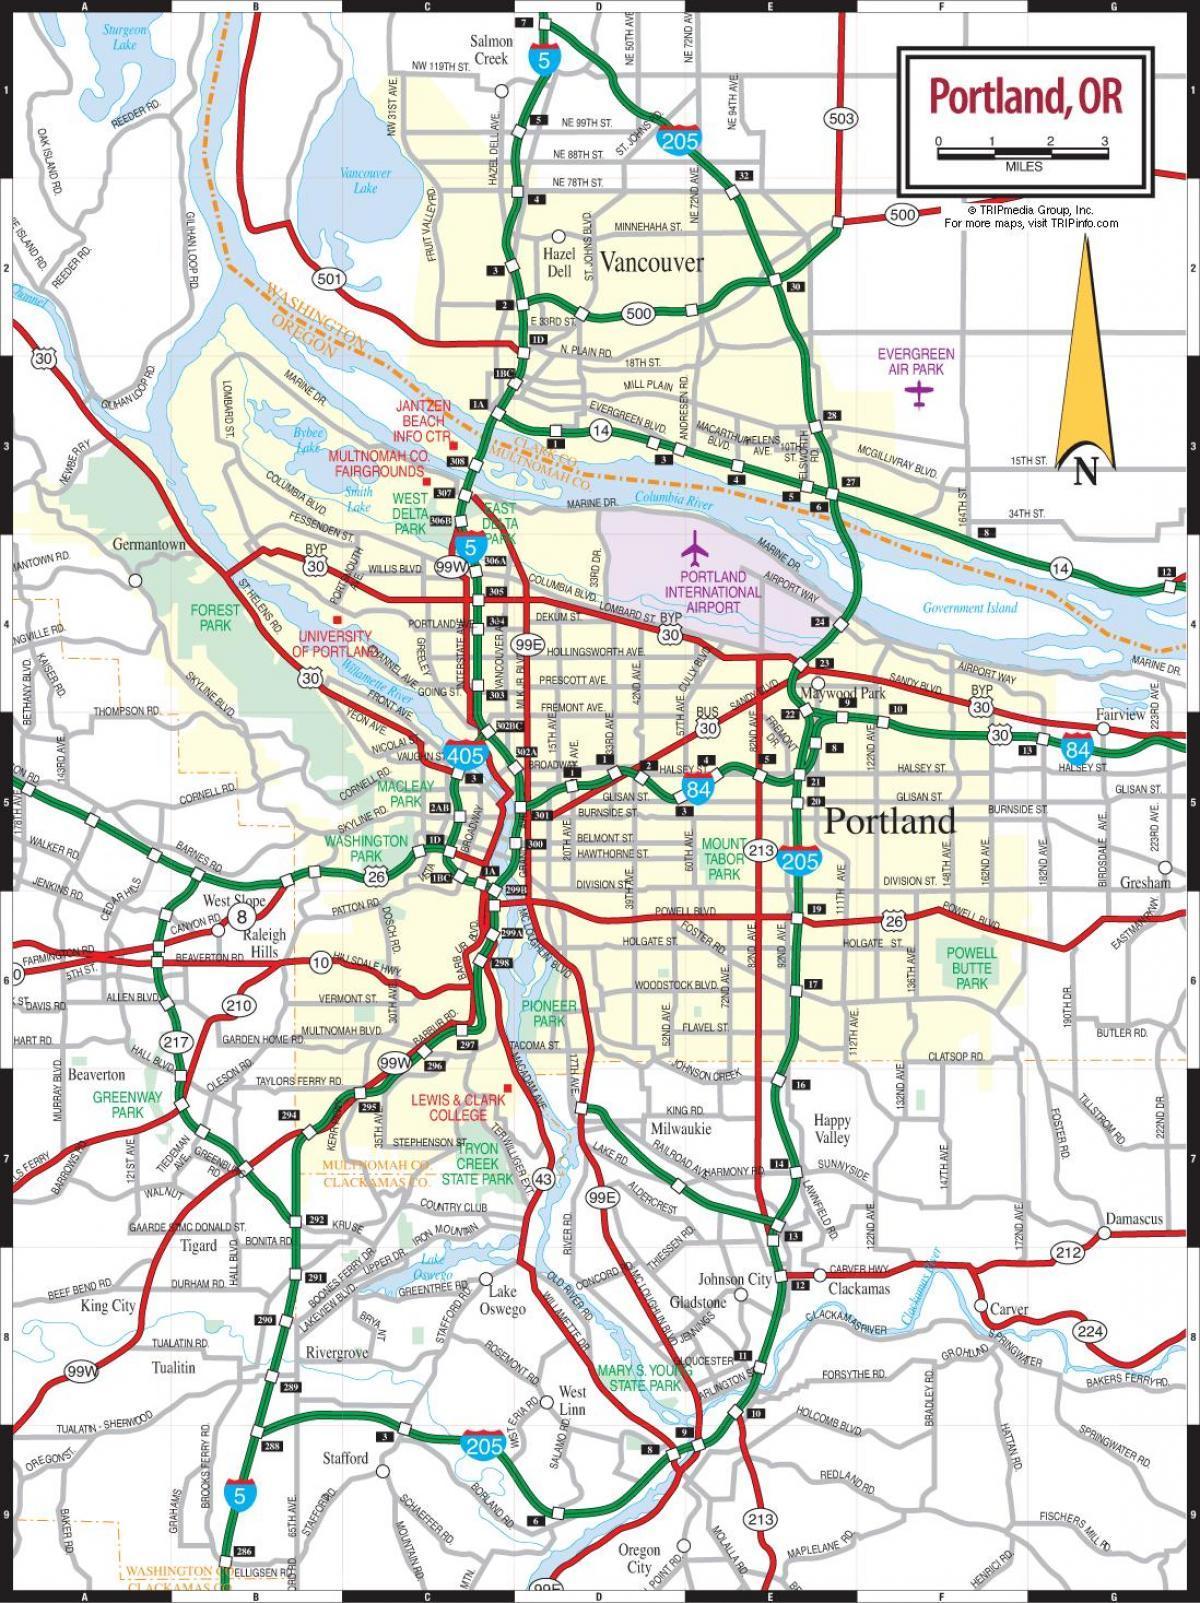 map of Portland or area